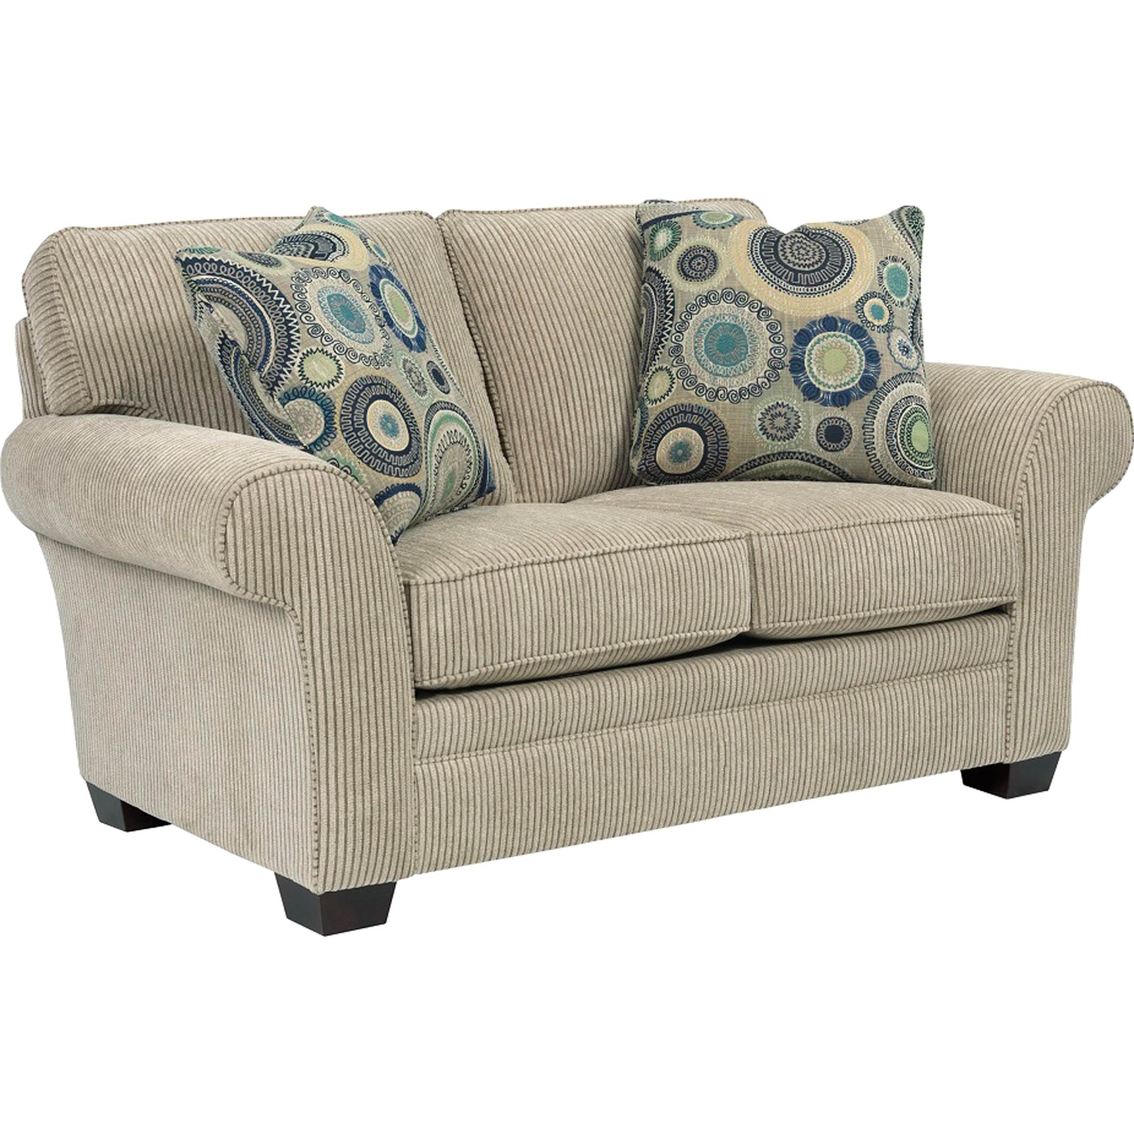 Broyhill Zachary Loveseat Sofas Couches Furniture Appliances Shop The Exchange